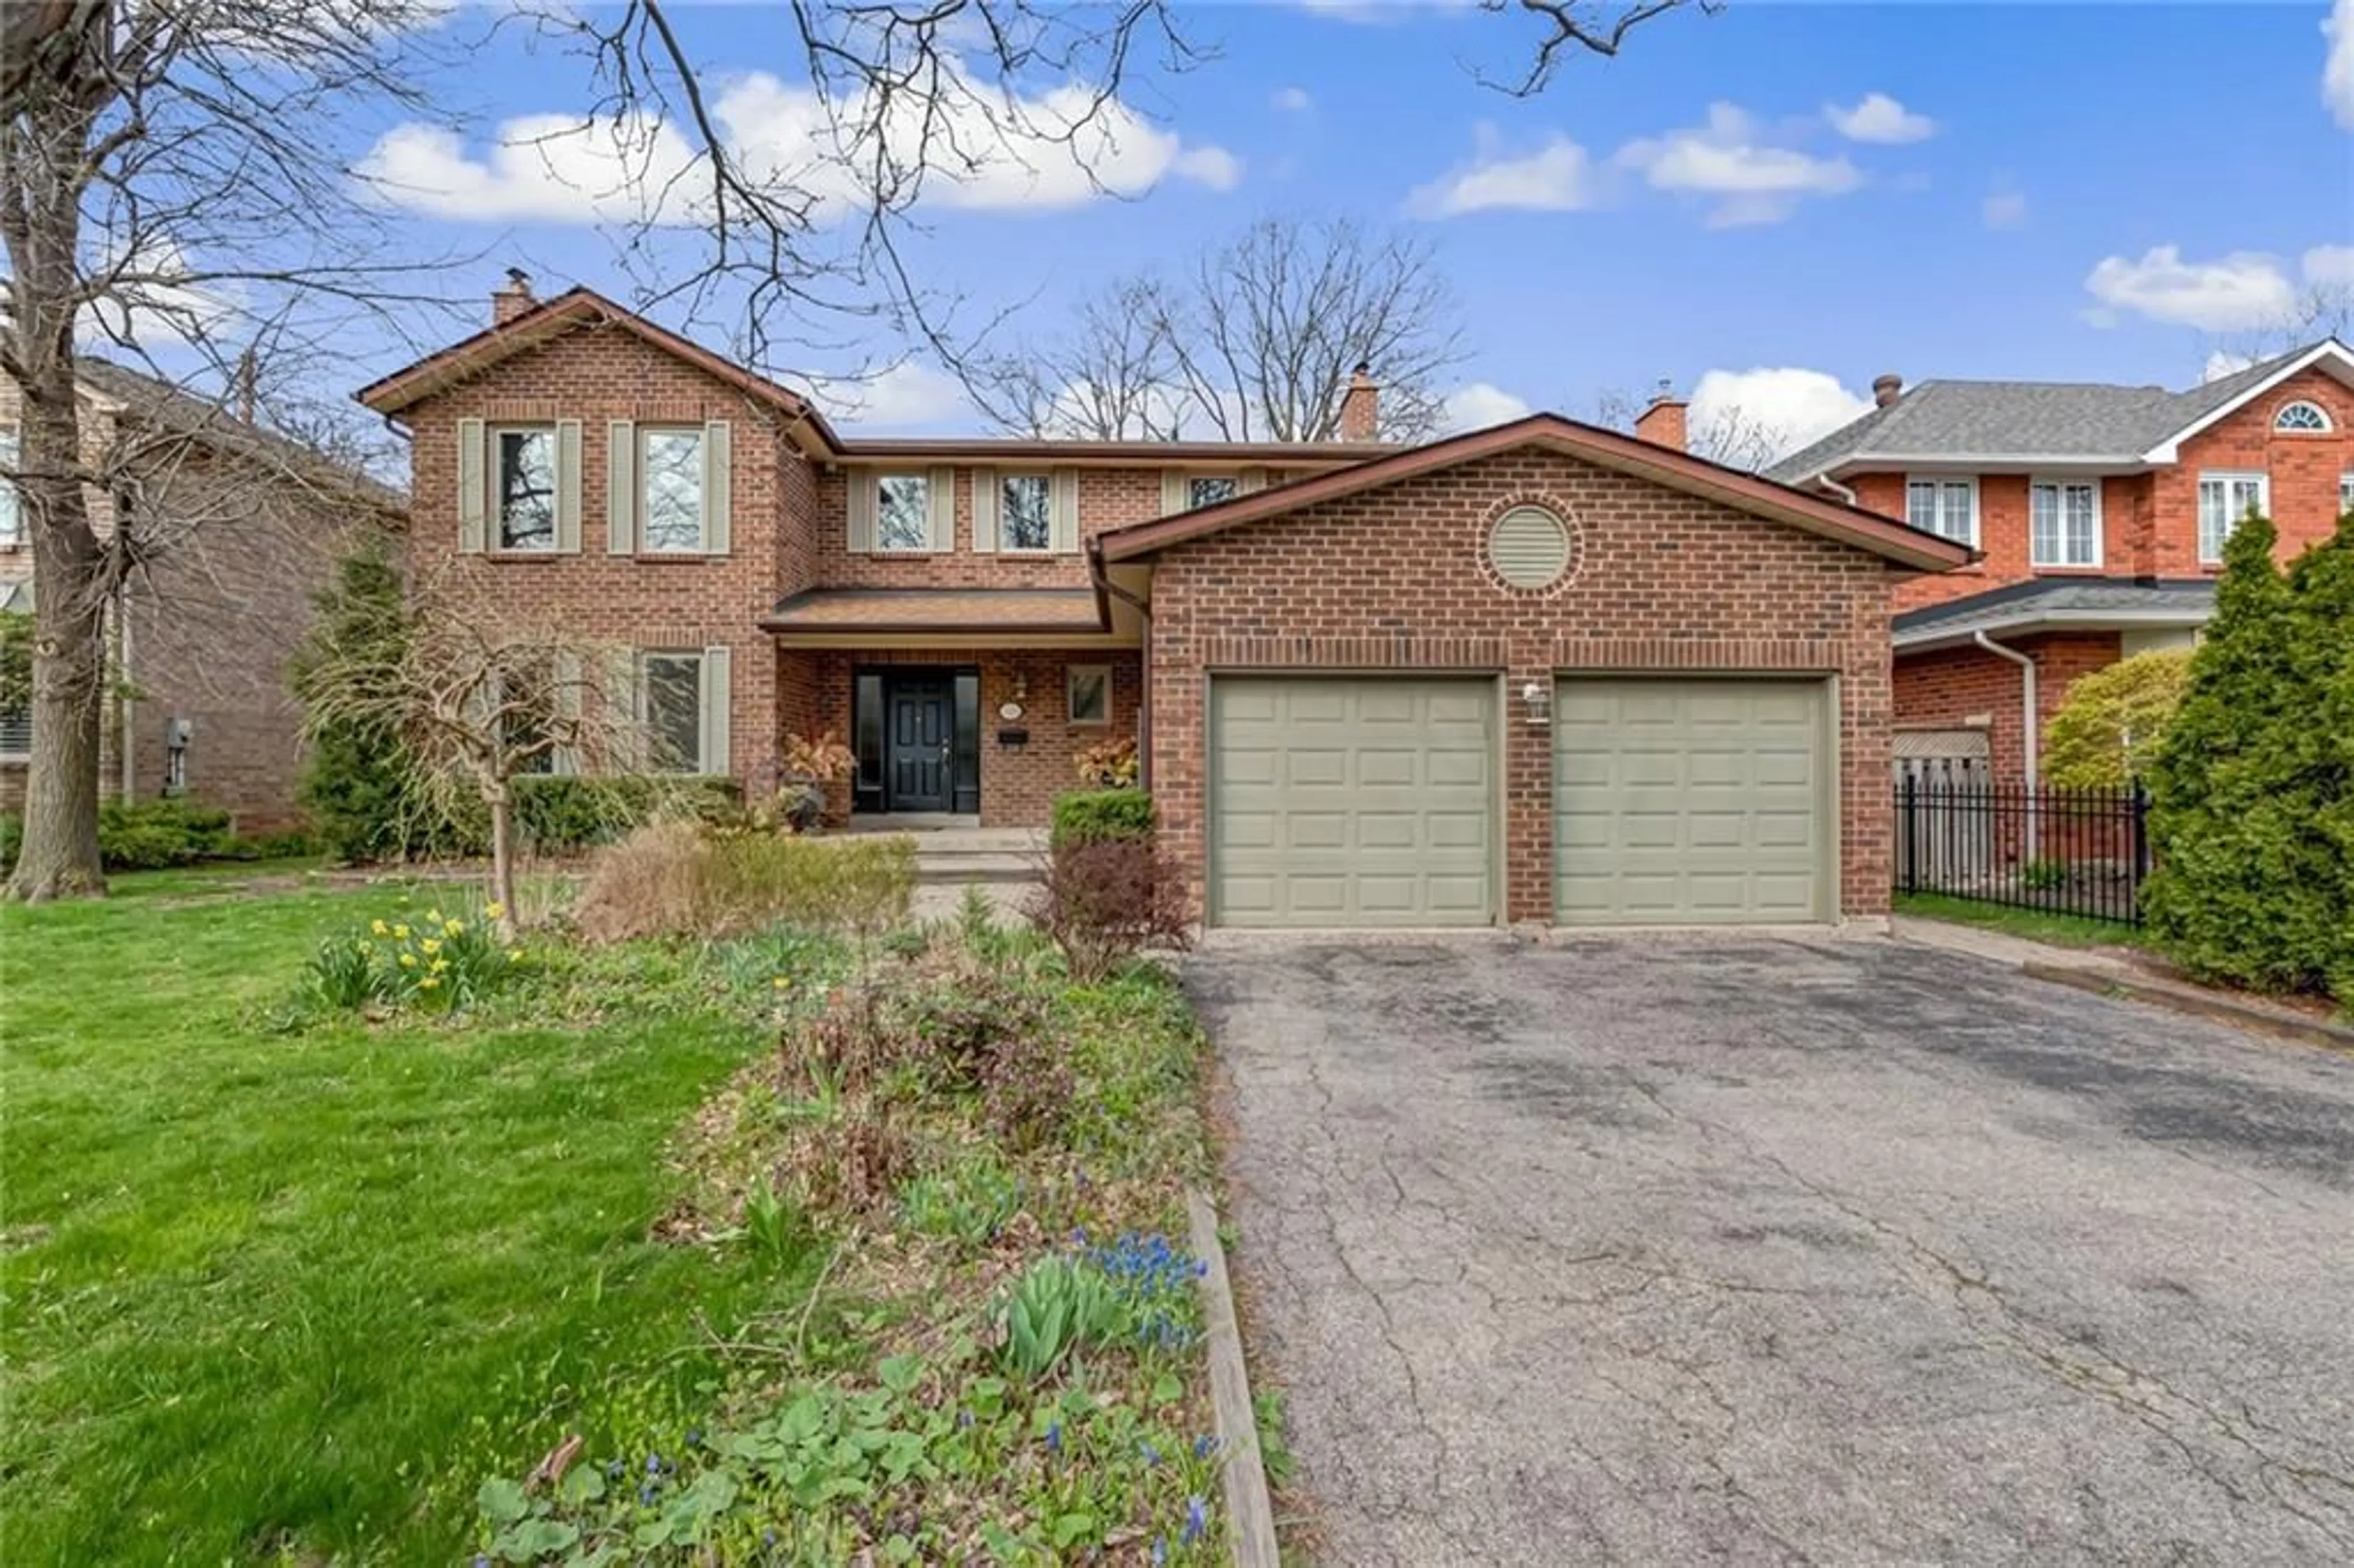 Home with brick exterior material for 1201 RUSHBROOKE Dr, Oakville Ontario L6M 1H8